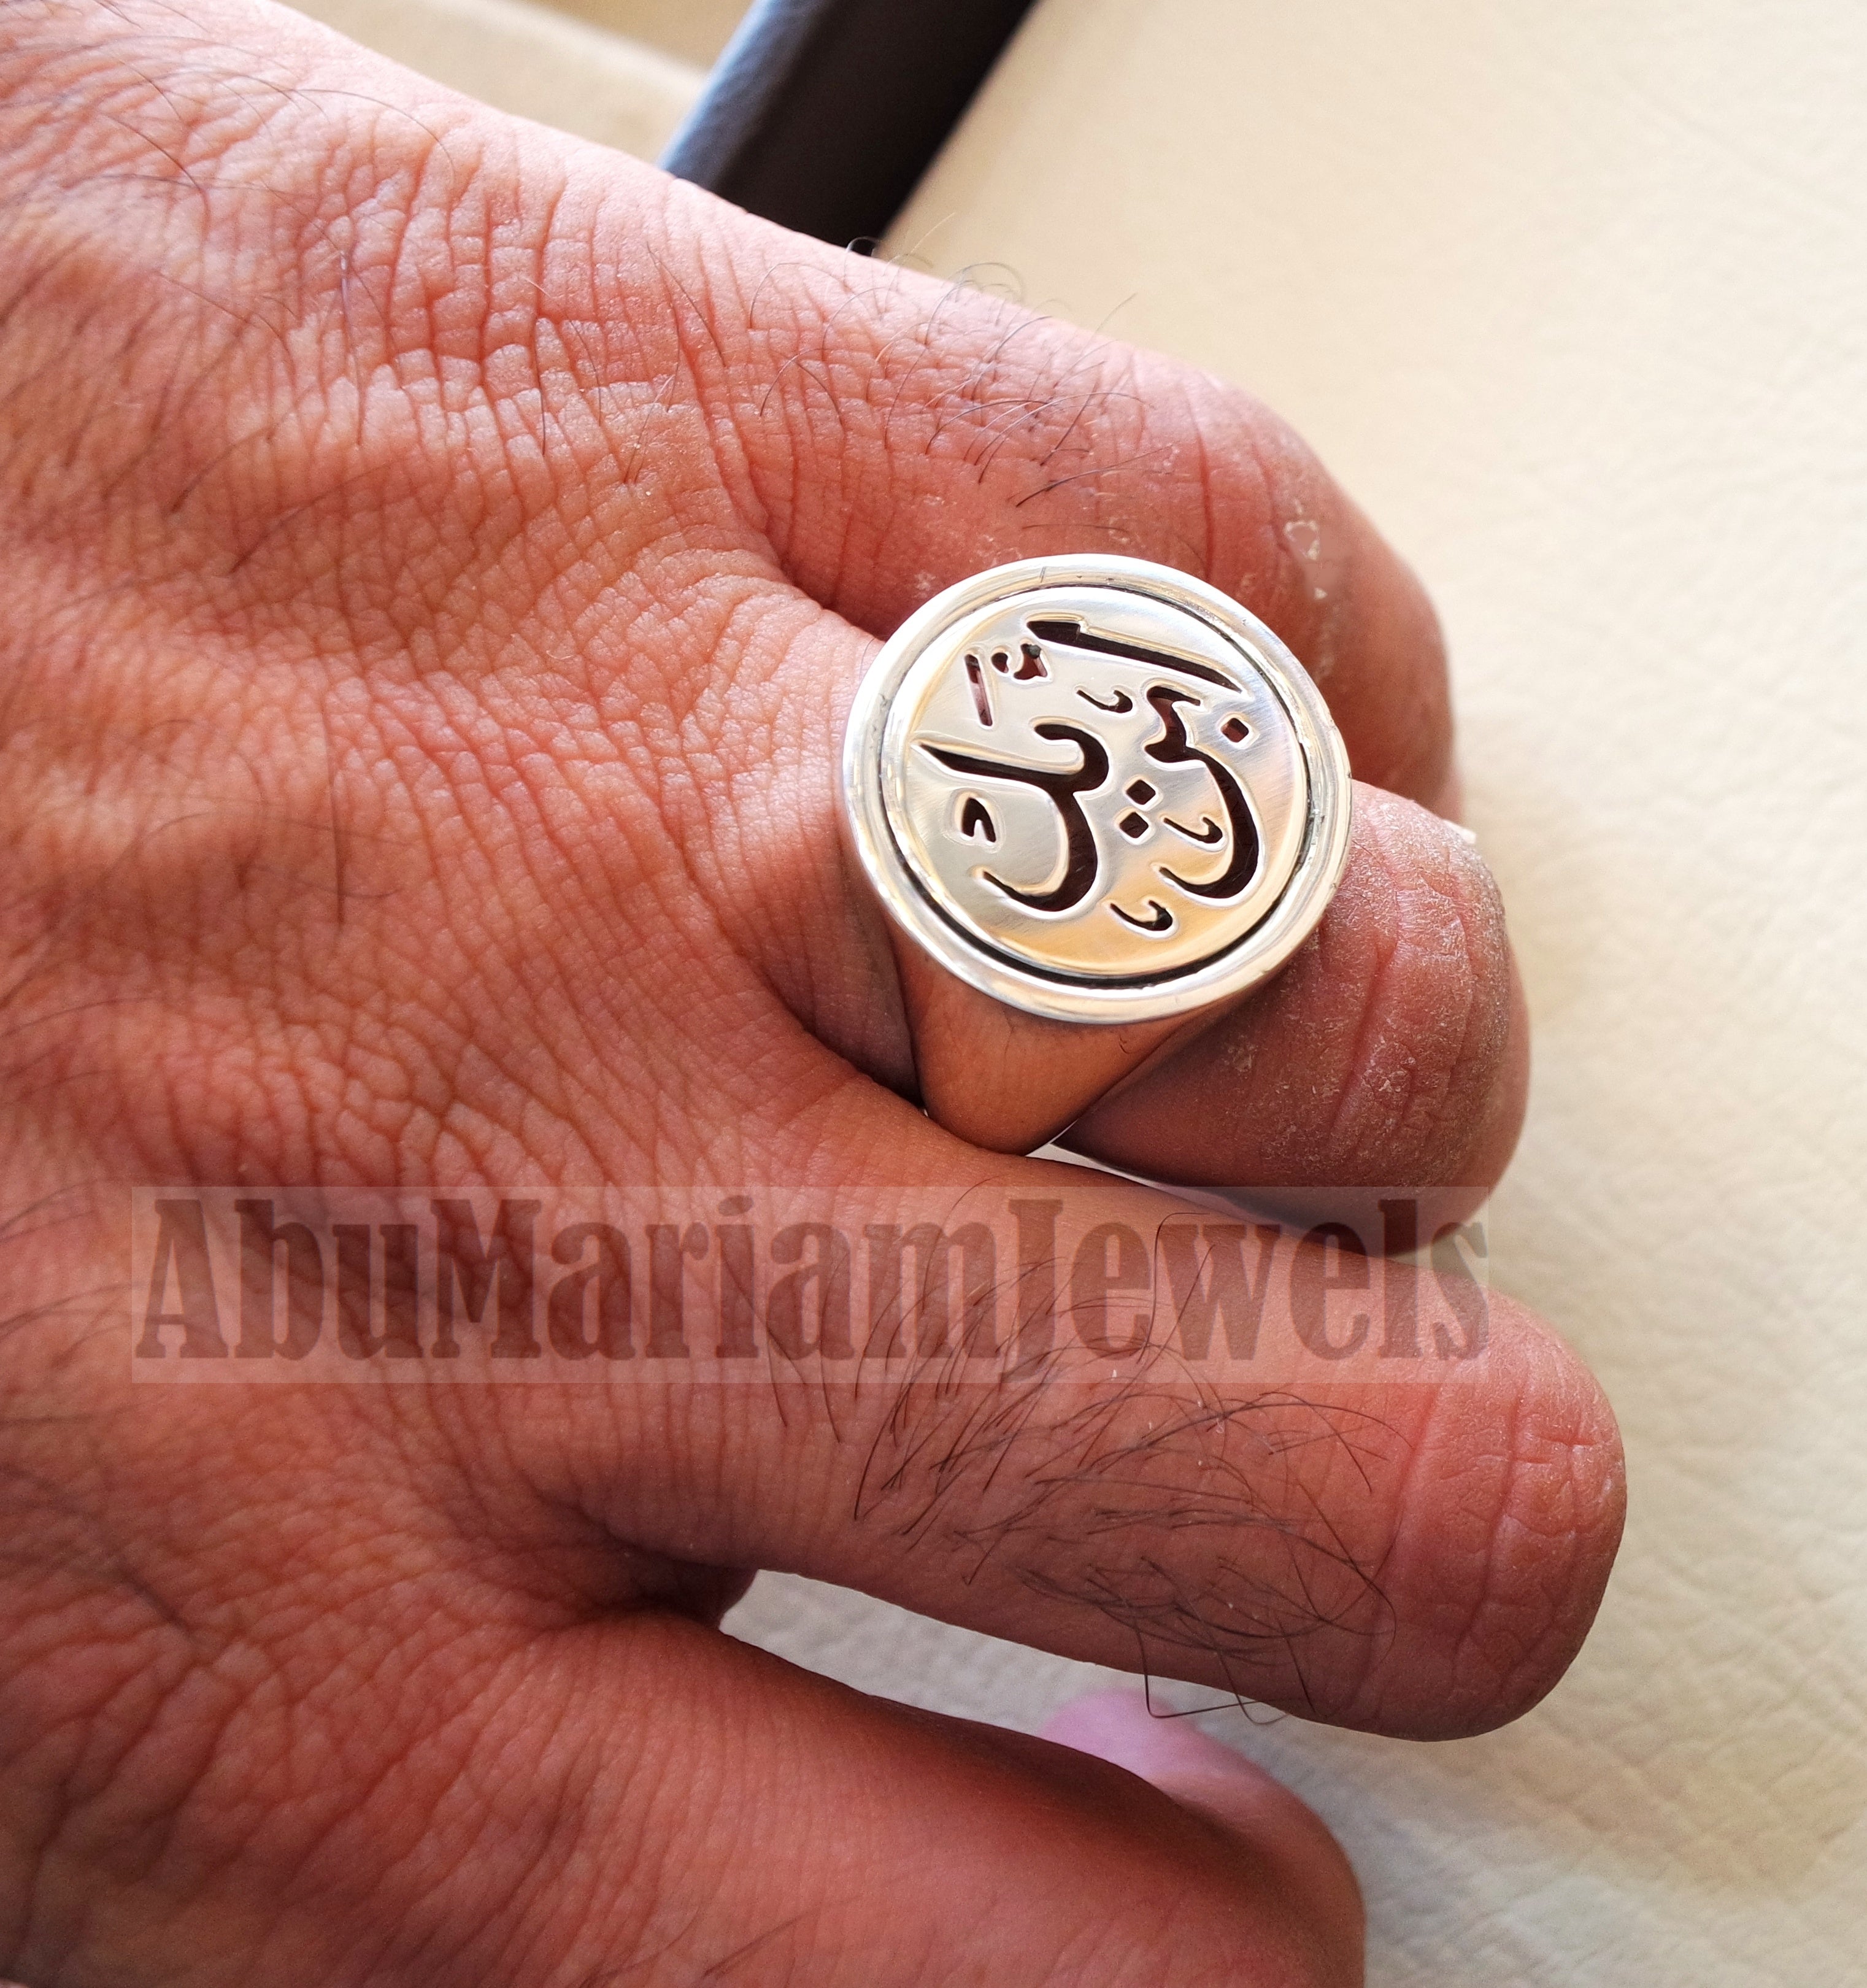 Customized Arabic calligraphy names handmade round heavy ring personalized jewelry sterling silver 925 any size AMM1002 خاتم اسم تفصيل